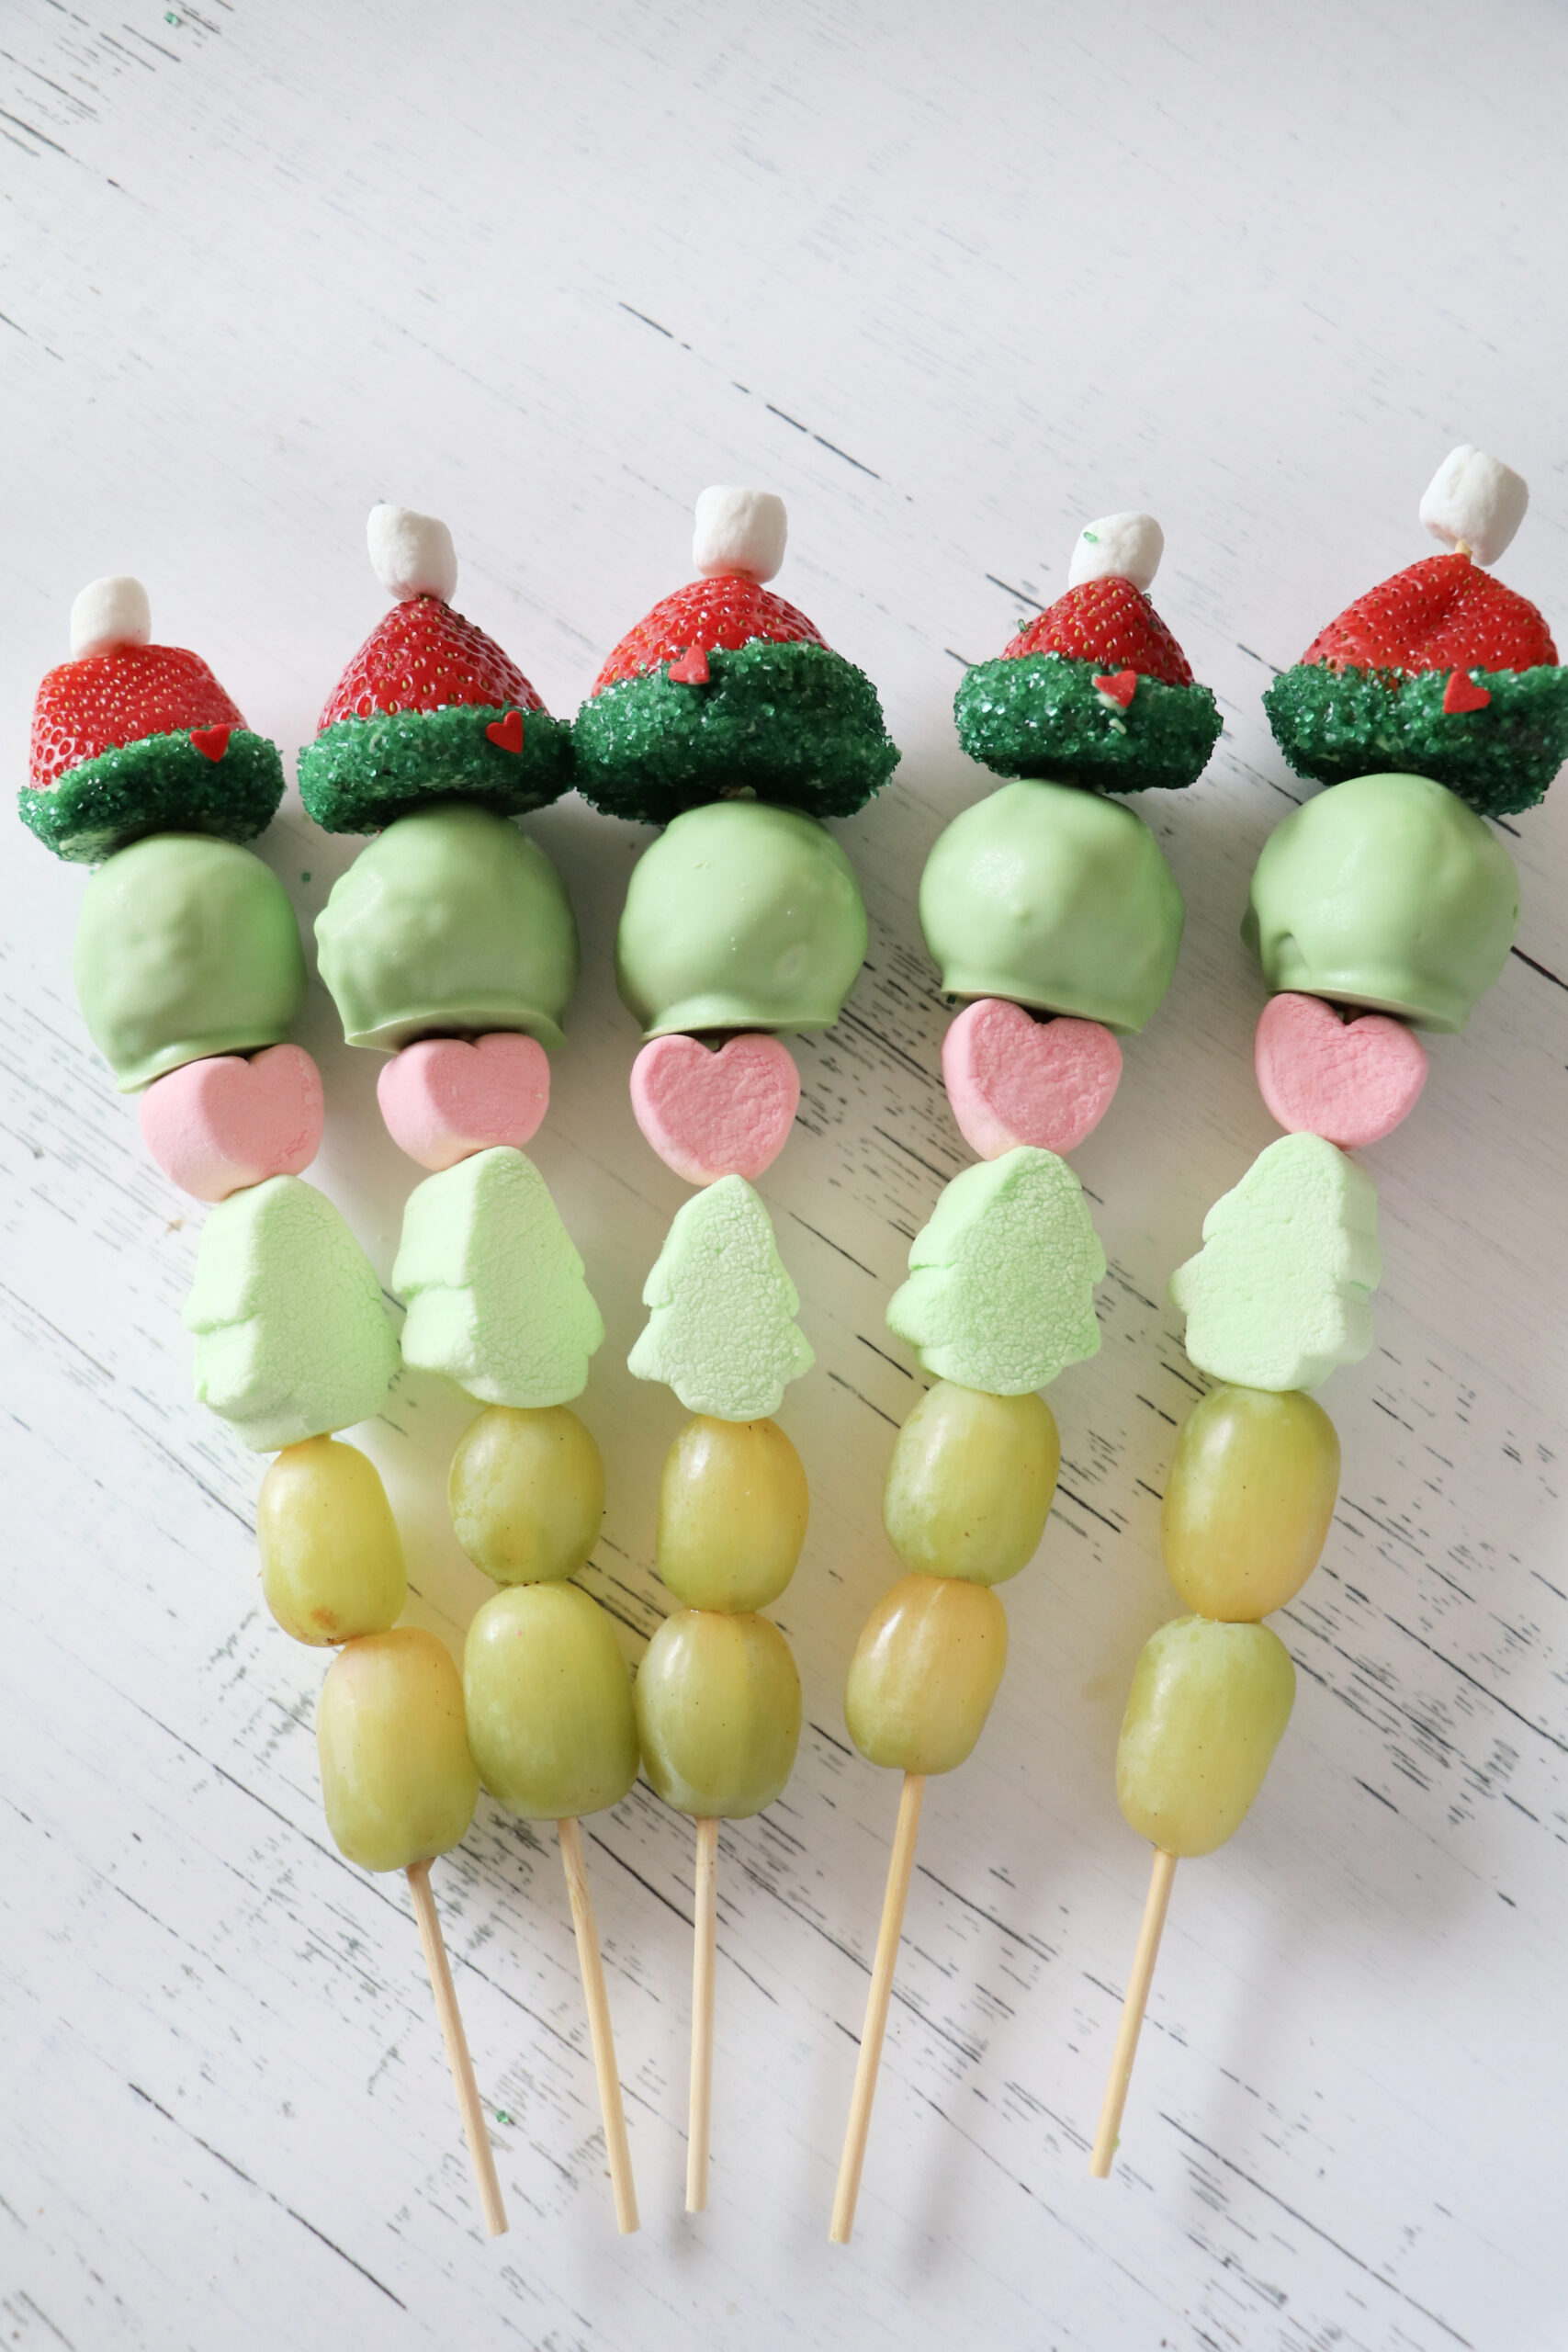 https://www.thedenverhousewife.com/wp-content/uploads/2021/11/The-Grinch-Snack-Ideas-scaled.jpg